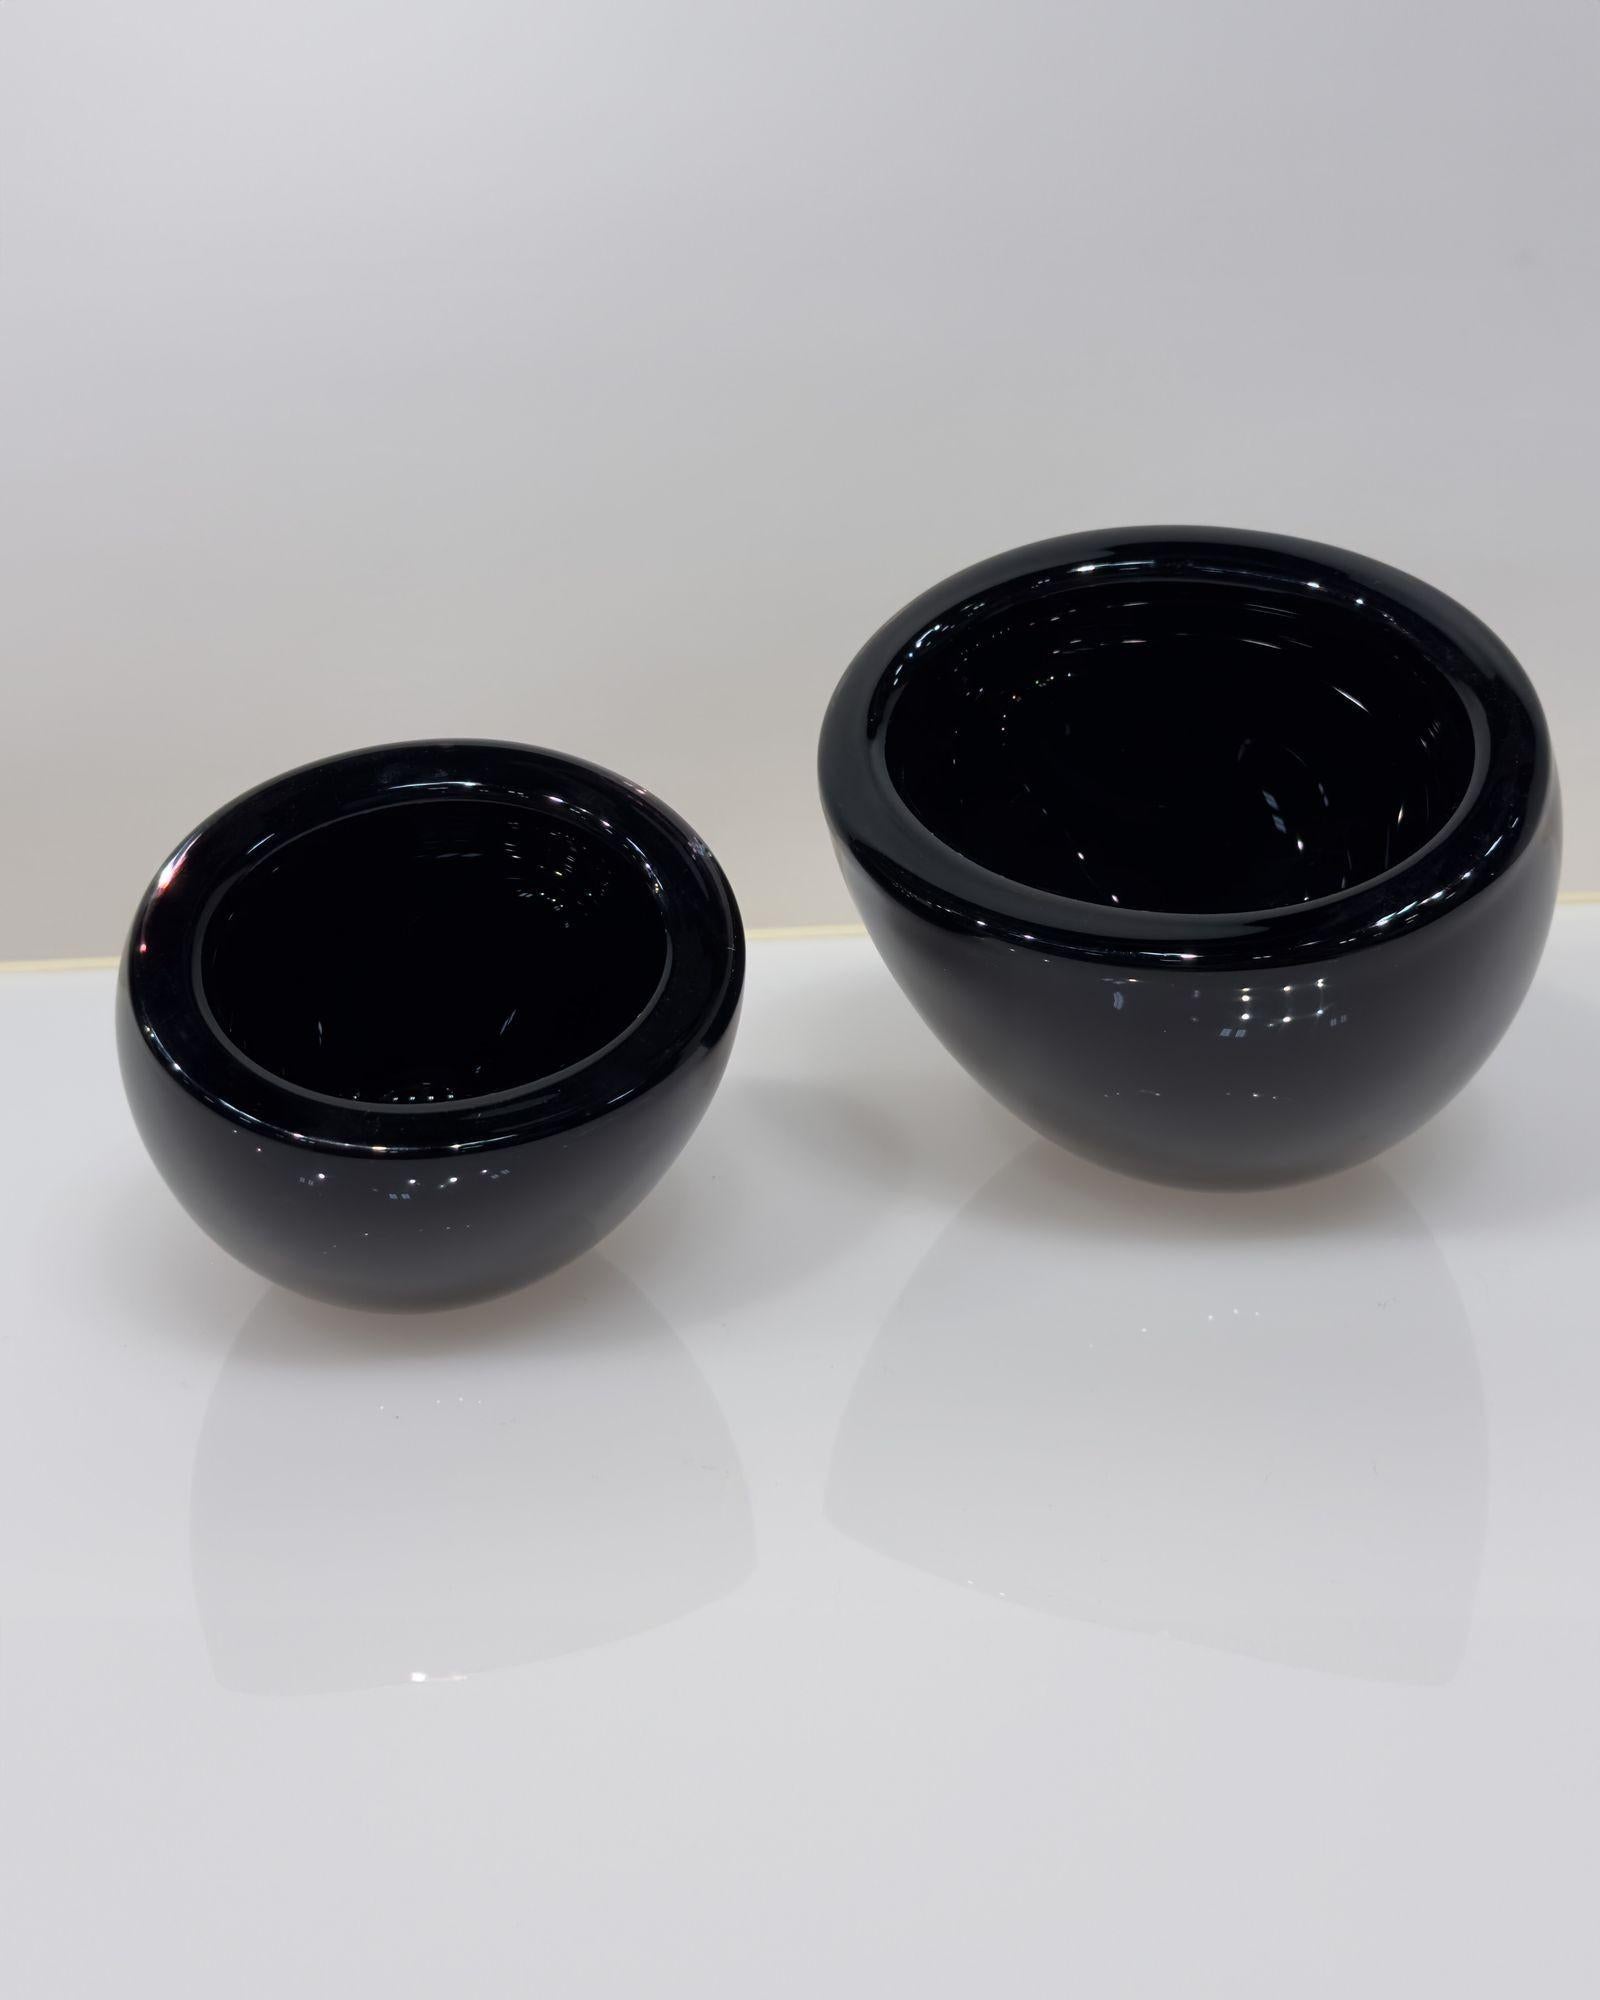 Pair Barbini Black Murano Bowls, Italy 1960. Excellent condition and tagged on bottom.
Measure Large bowl 7